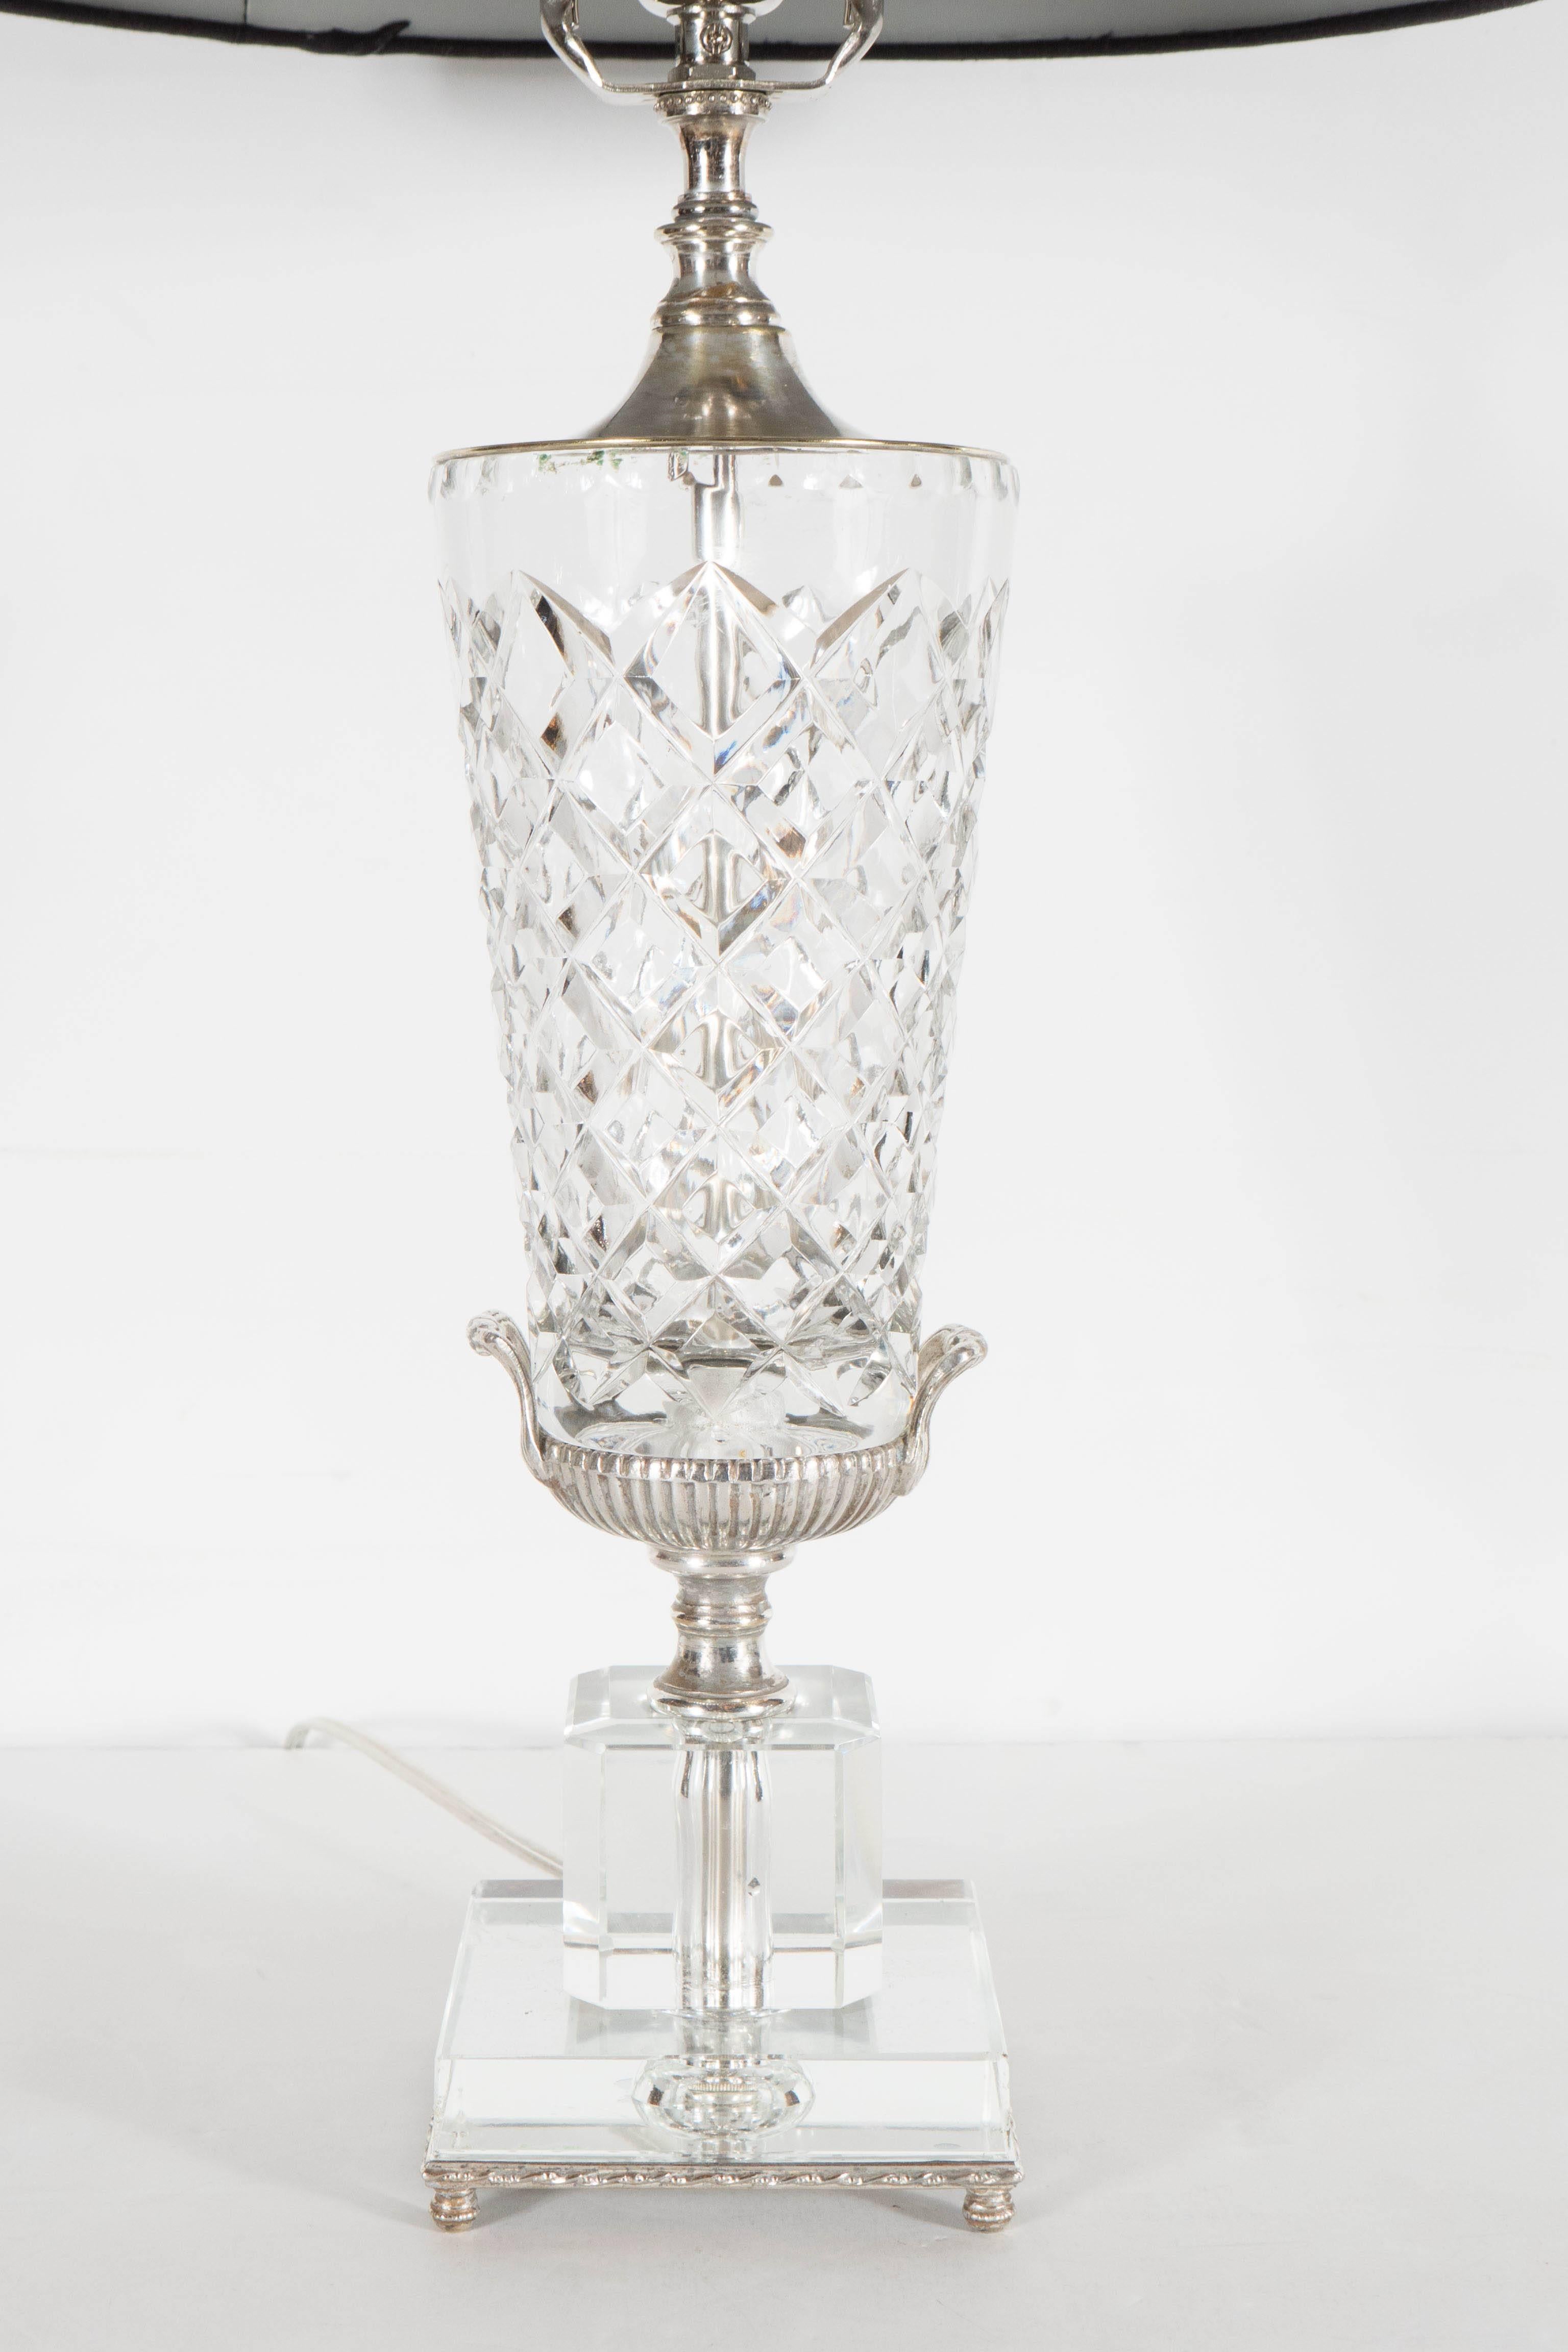 This stunning cut crystal table lamp features an urn form design. It features a silvered base with two cut crystal cube form steps supporting a silvered urn form supporting the bus crystal body of the lamp with cross hatched detailing. It has been